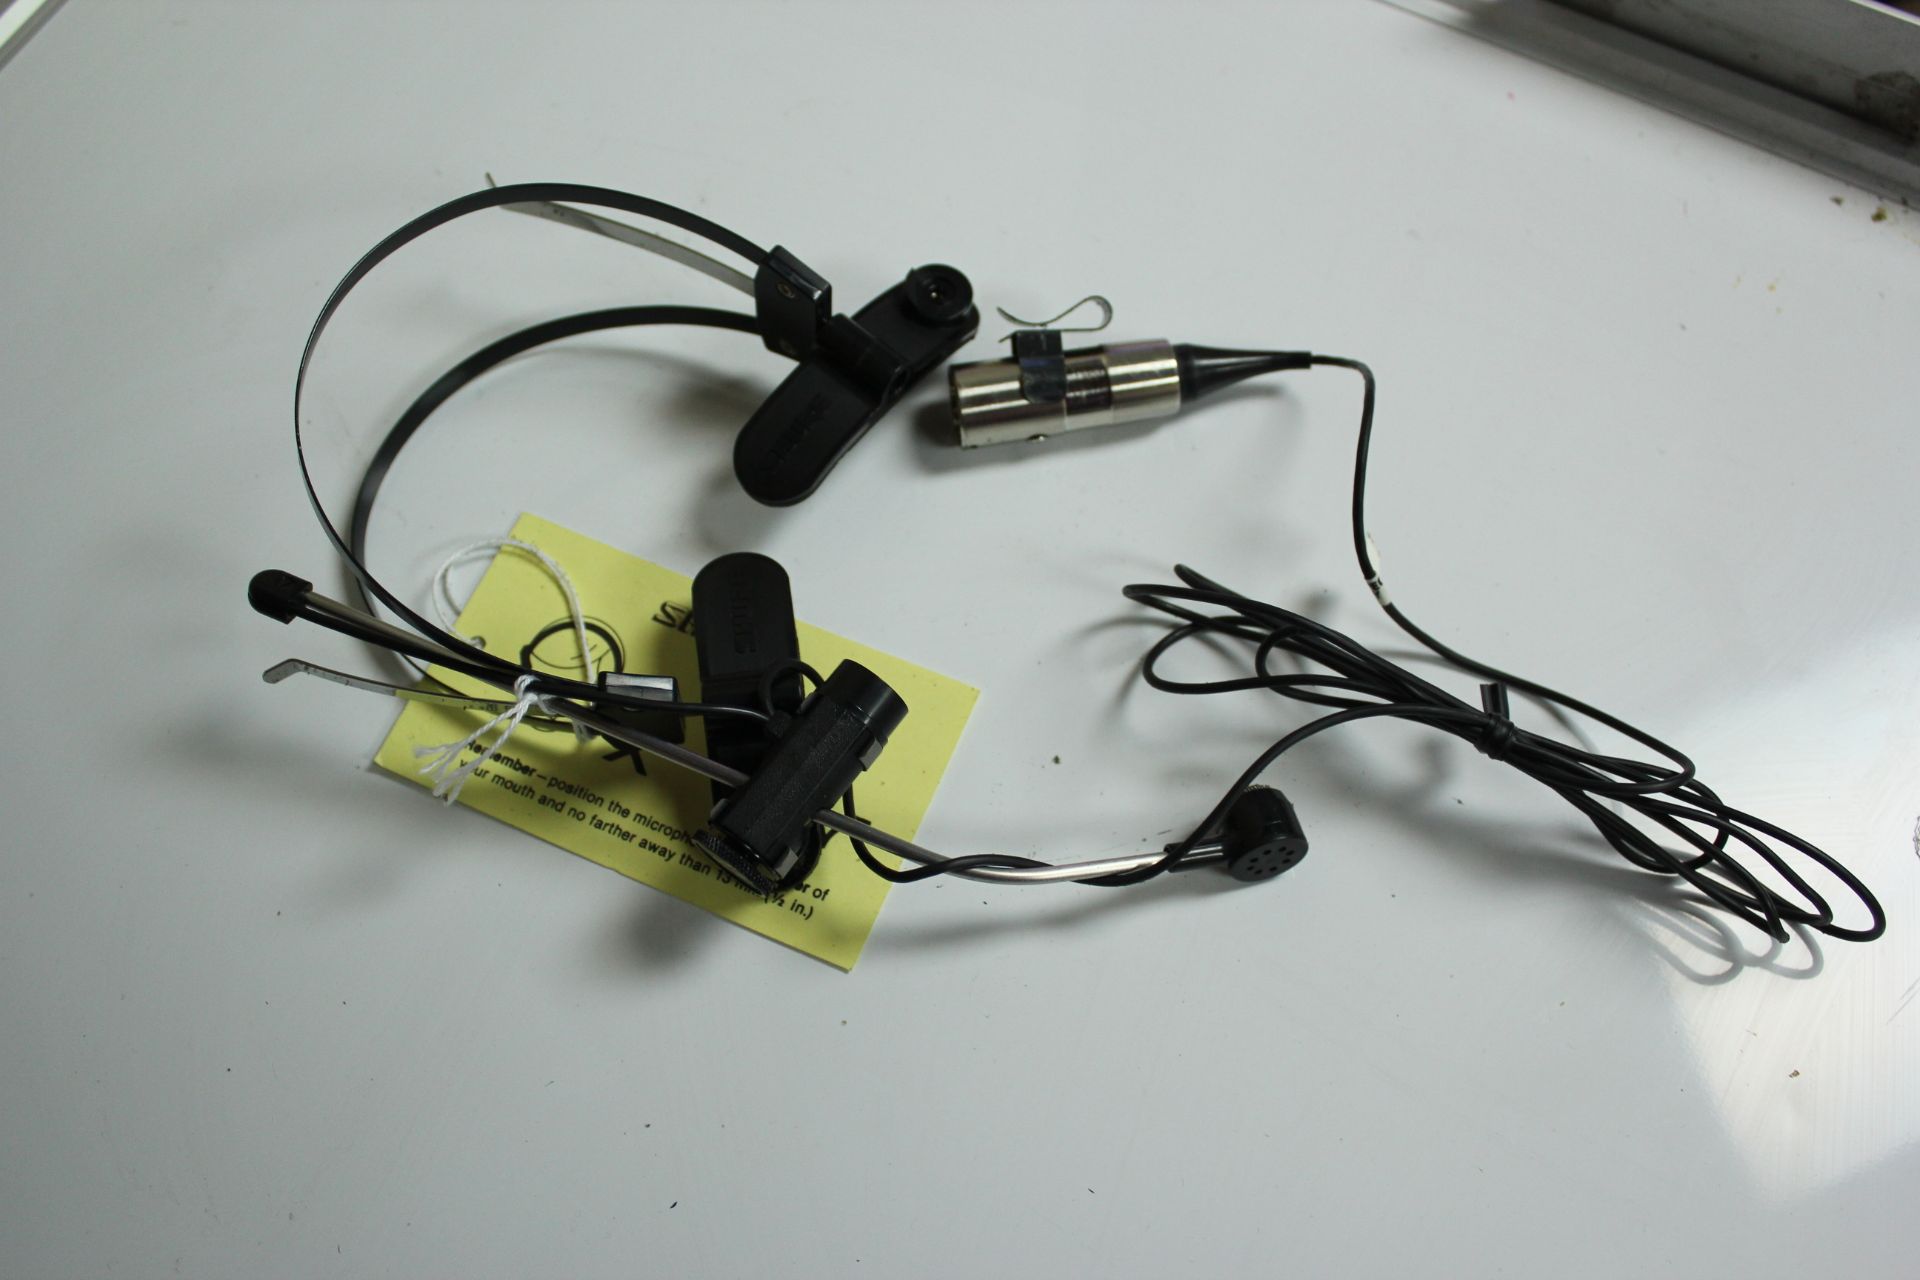 NEW SHURE PROFESSIONAL HEAD WORN MICROPHONE - Image 3 of 5